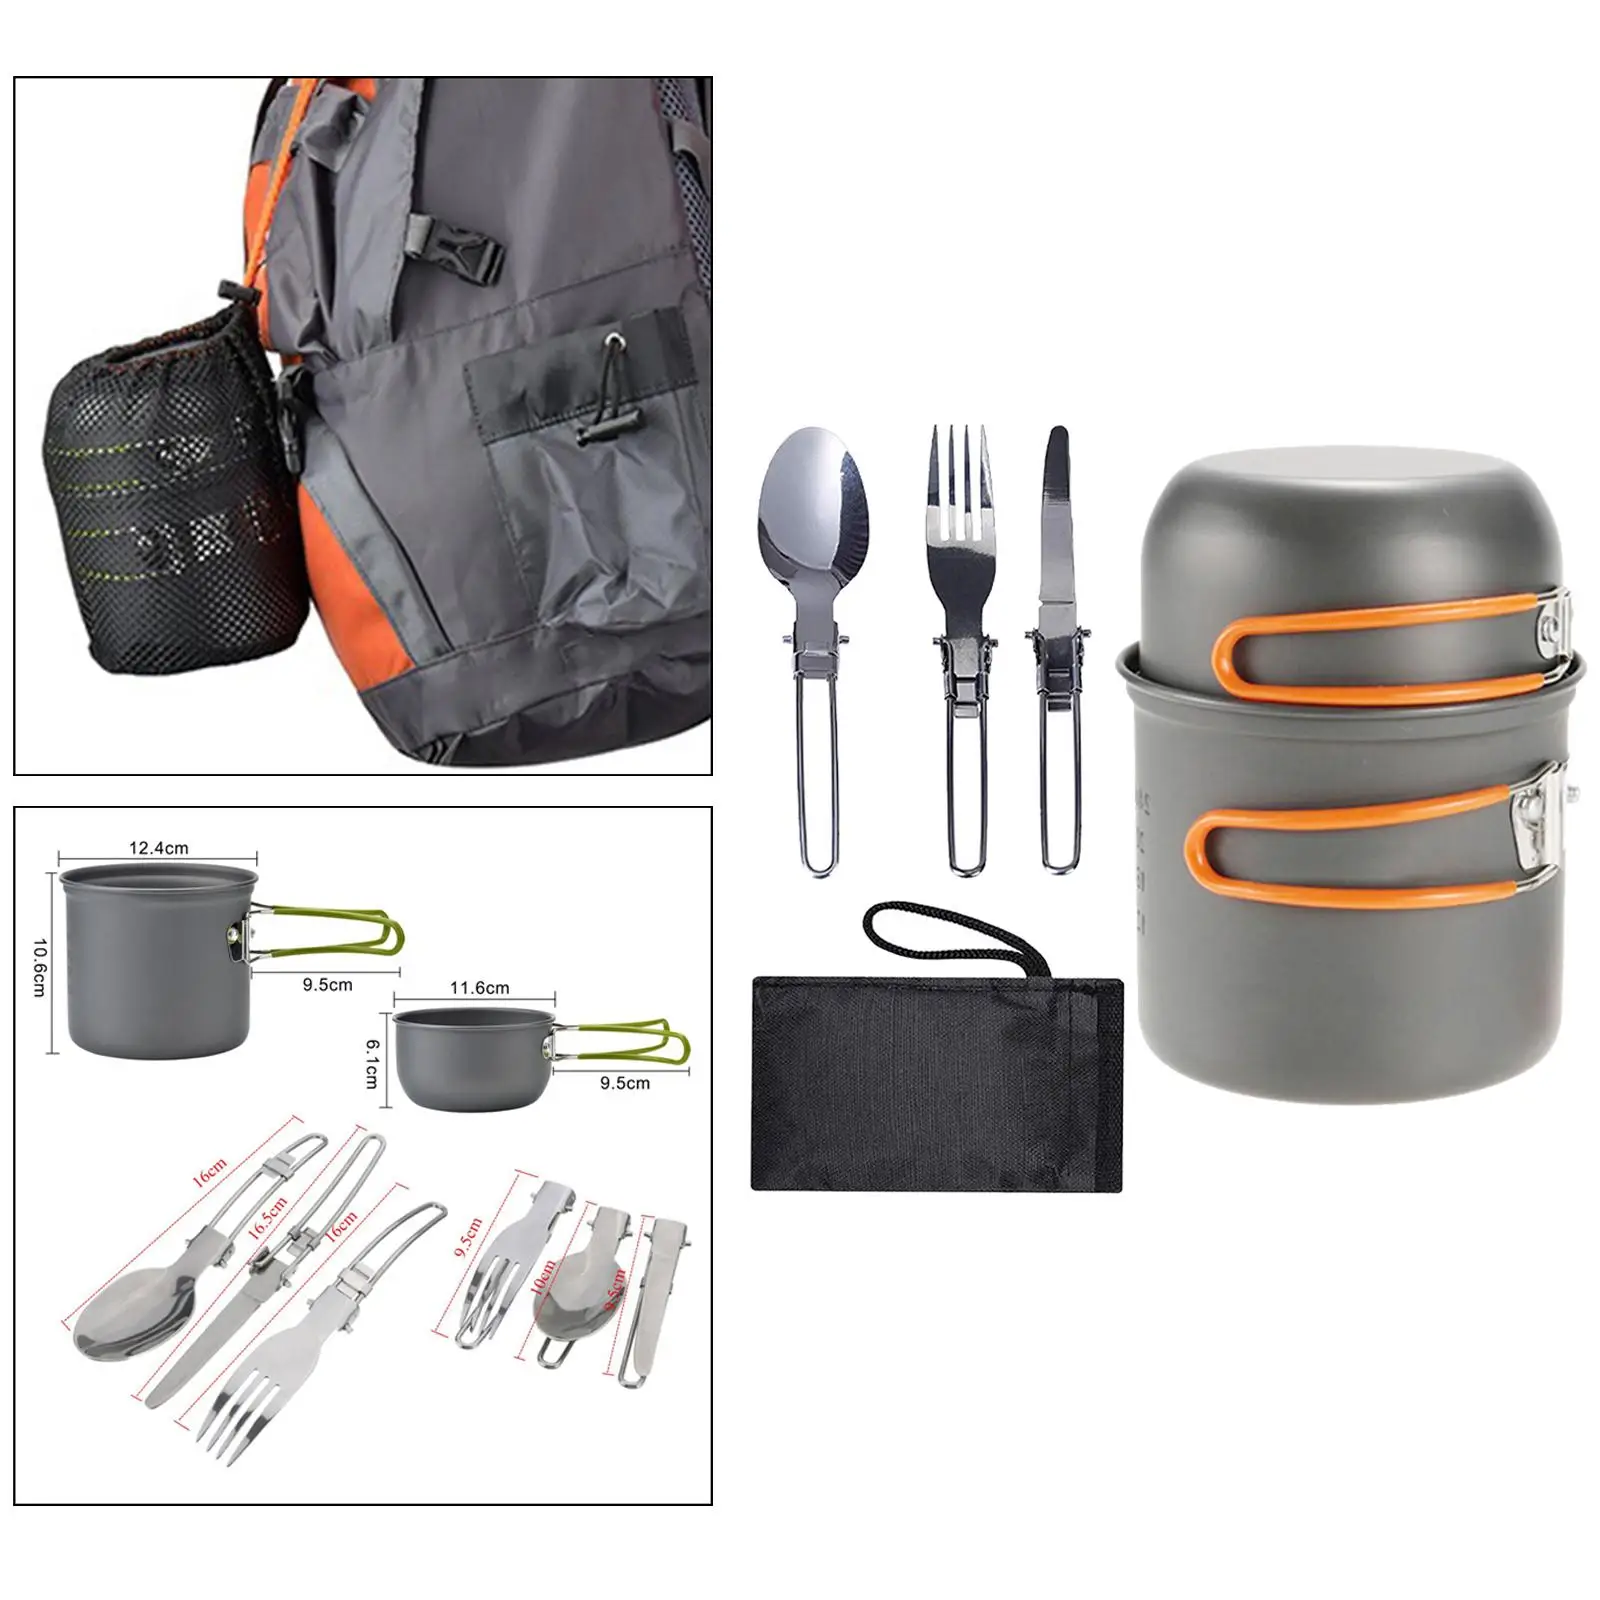 5 Pieces Folding Camping Tableware Cookware Set -2 Person Including 1/Pot, 1/Pan, 1x Fork, 1x  and 1x Spoon